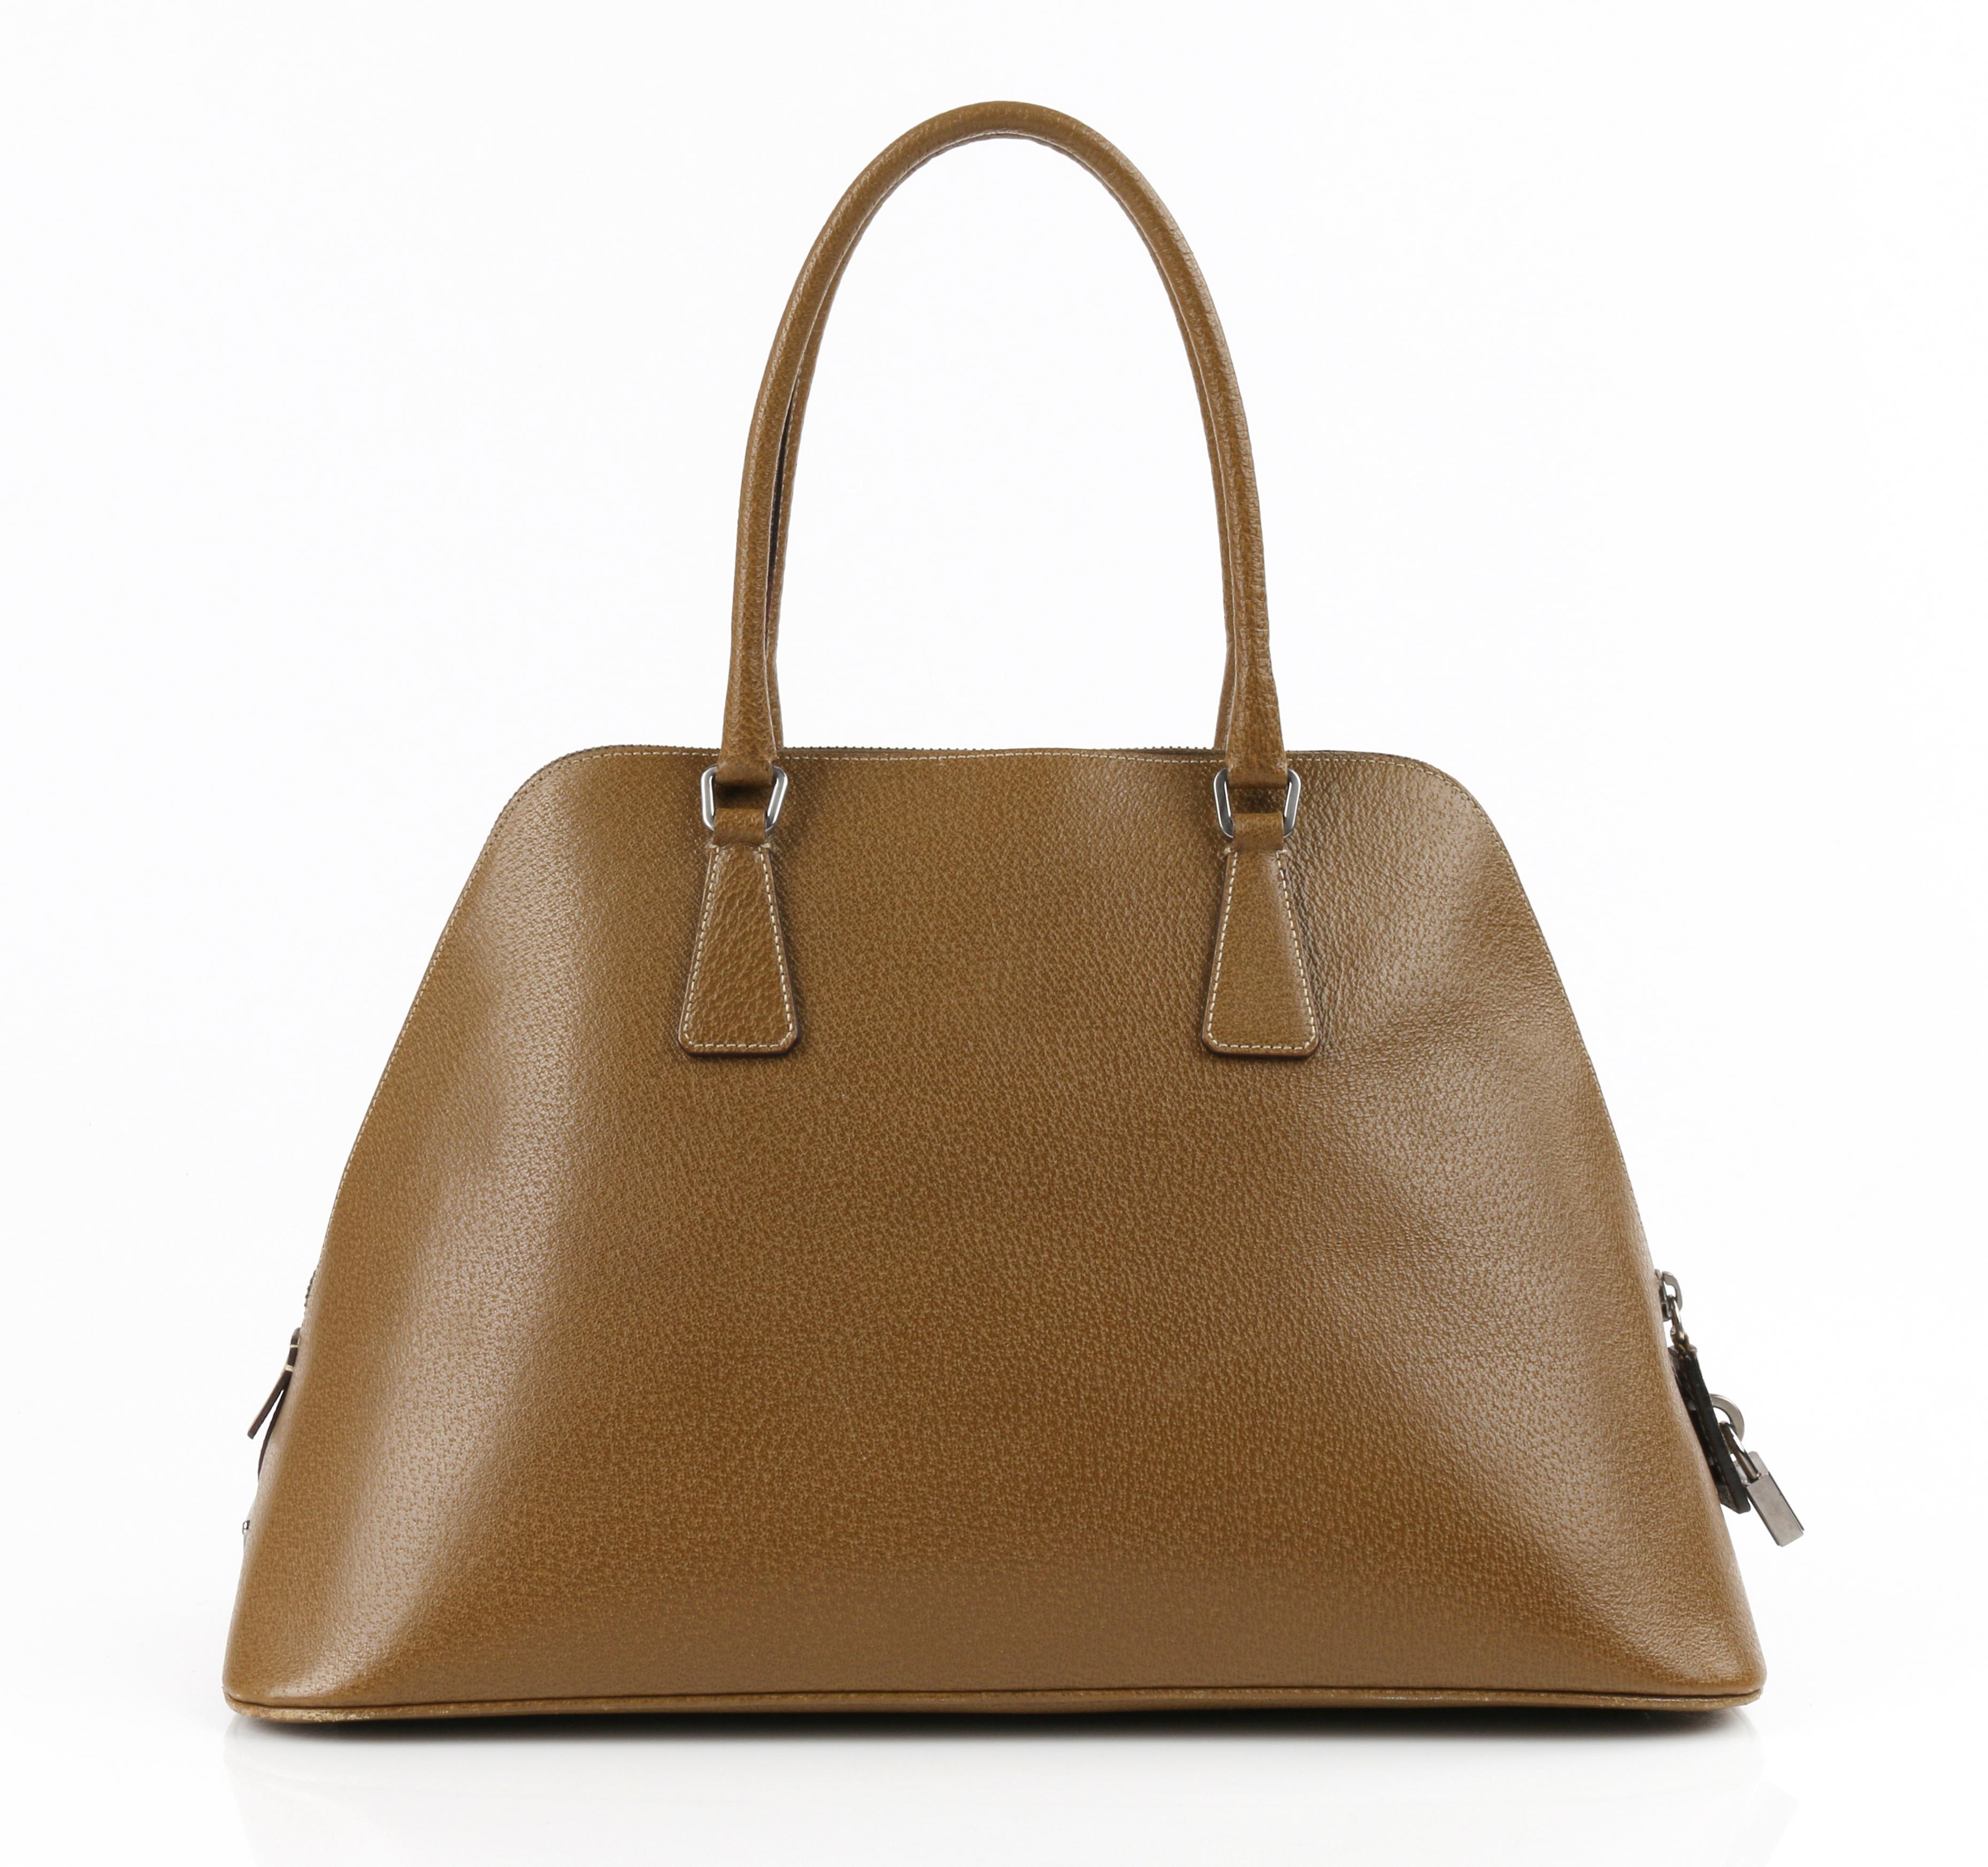 PRADA Olive Brown Leather Structured Top Handle Trapezoid Satchel Purse
 
Brand / Manufacturer: Prada
Style: Trapezoid satchel
Color(s): Olive brown
Lined: Yes
Unmarked Fabric Content (feel of): Leather
Additional Details / Inclusions: Olive brown